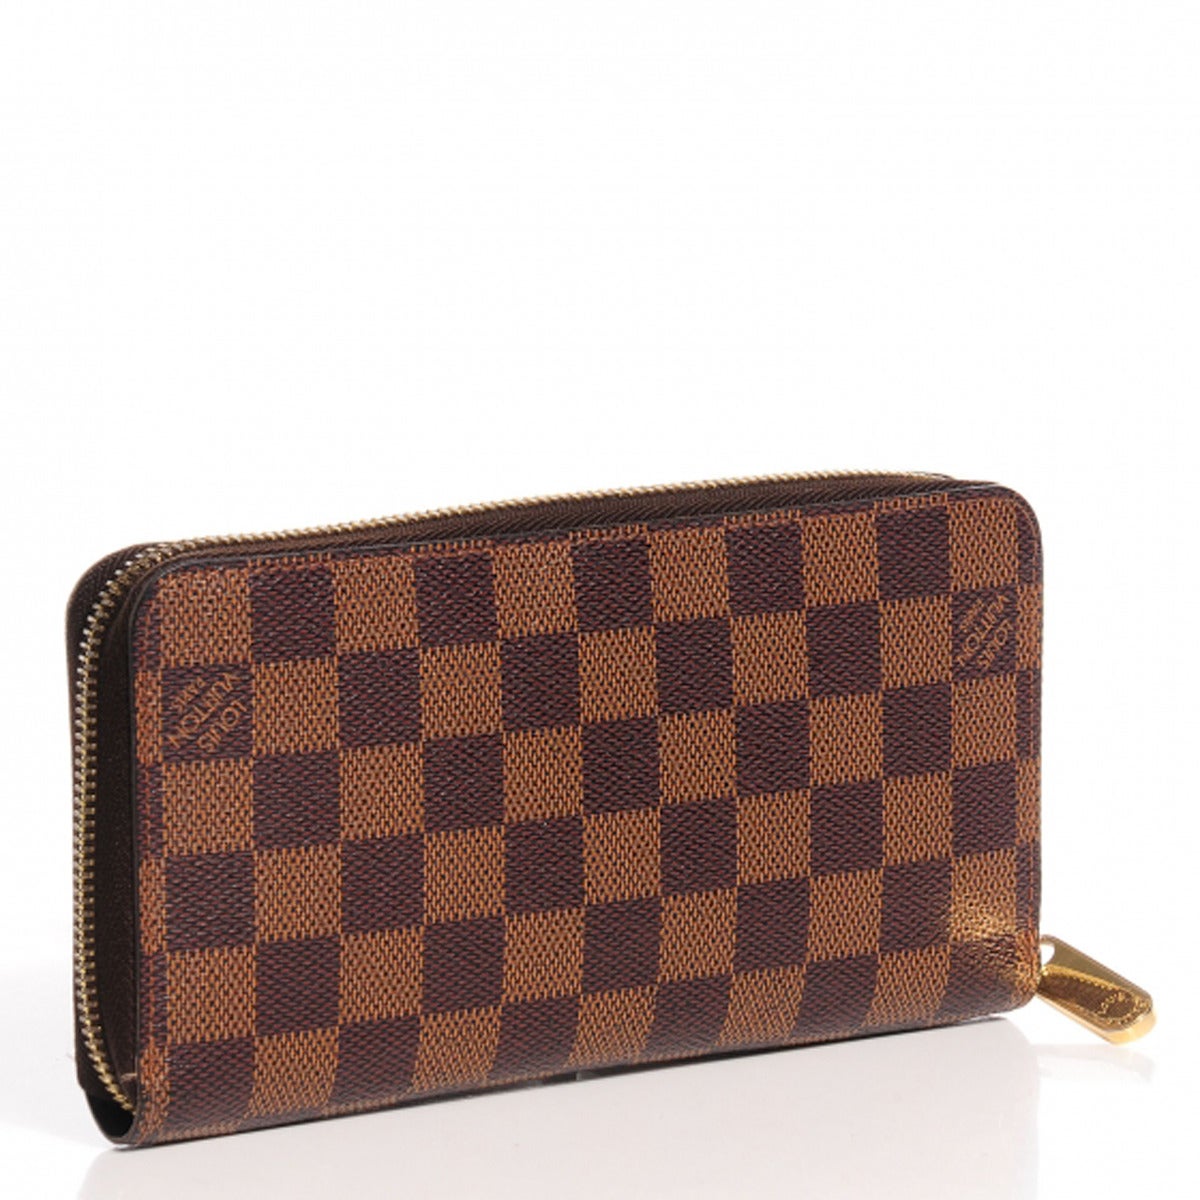 Louis Vuitton Monet Clutch | Confederated Tribes of the Umatilla Indian Reservation